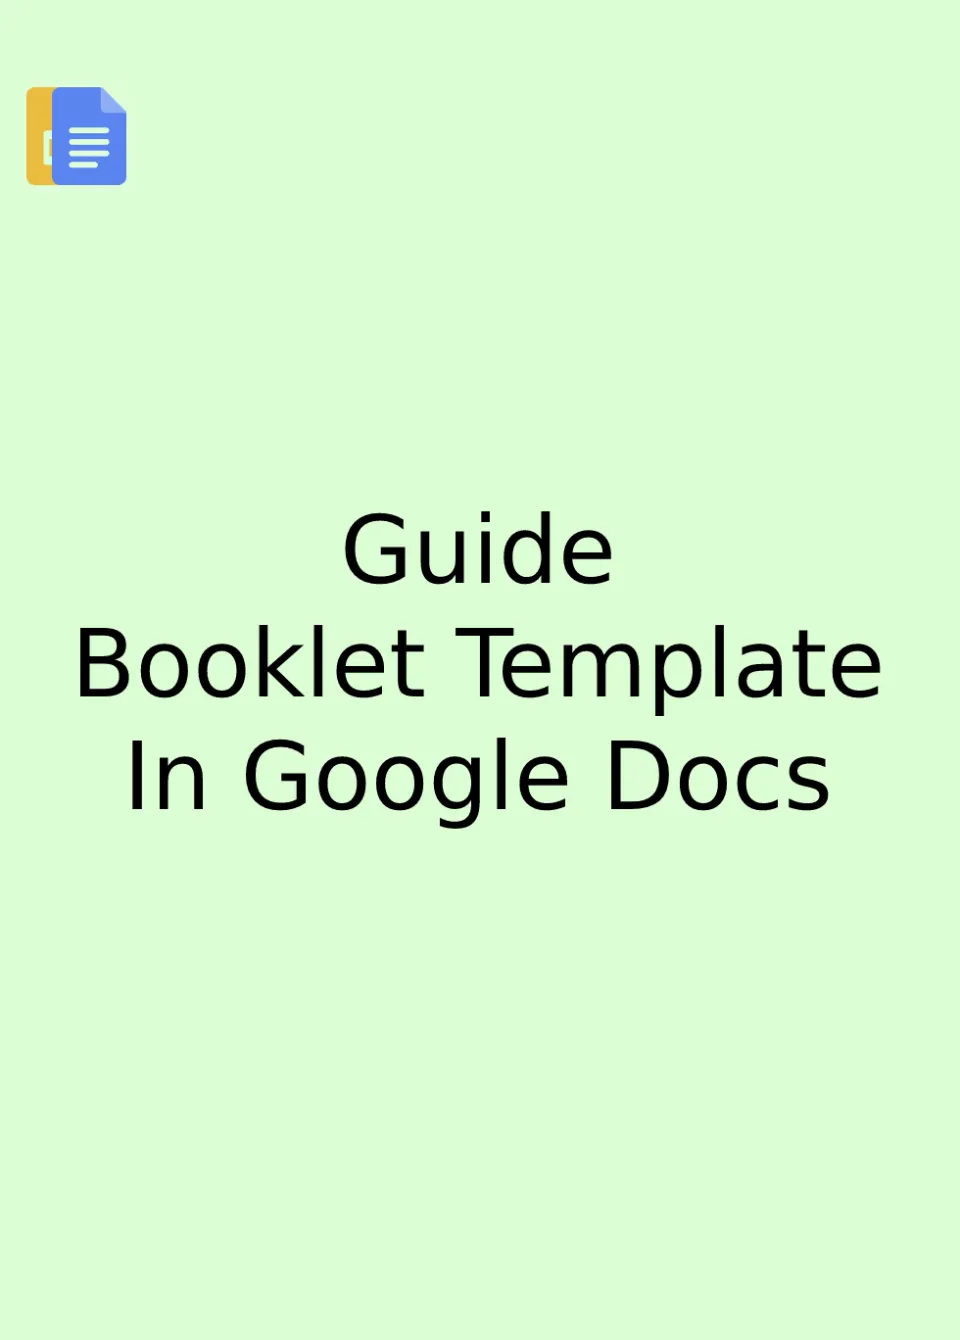 Guide Booklet Template Google Docs